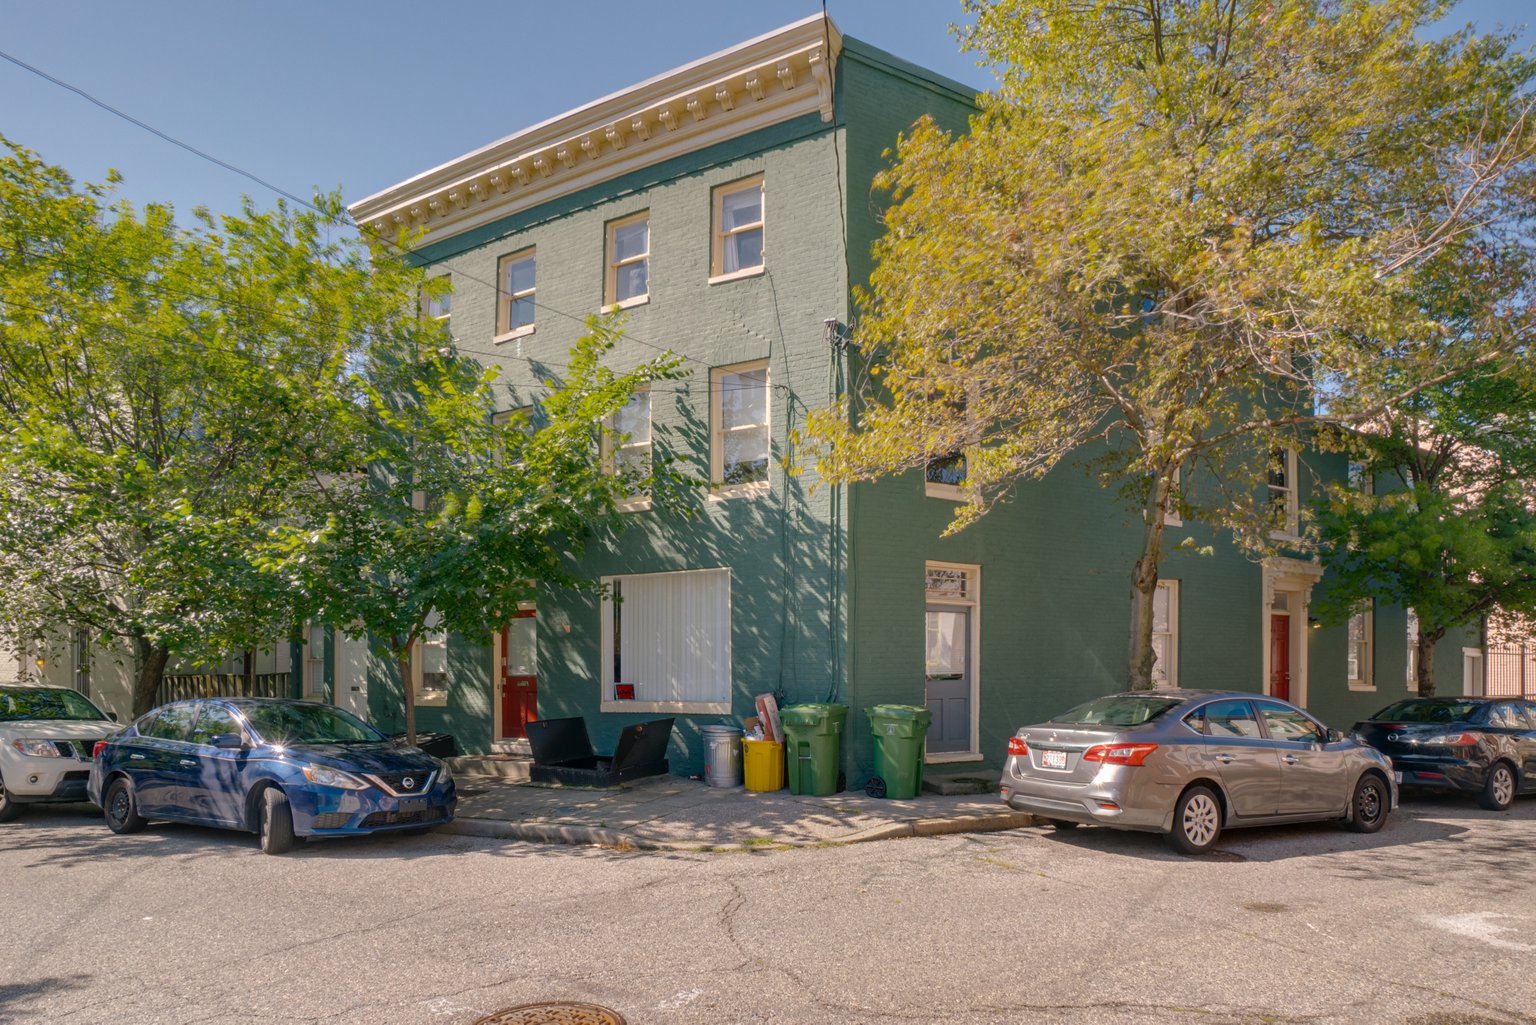 312 Emory Street: 3 Apartments in the heart of Ridgely’s Delight / Recently Renovated/ Fully Leased